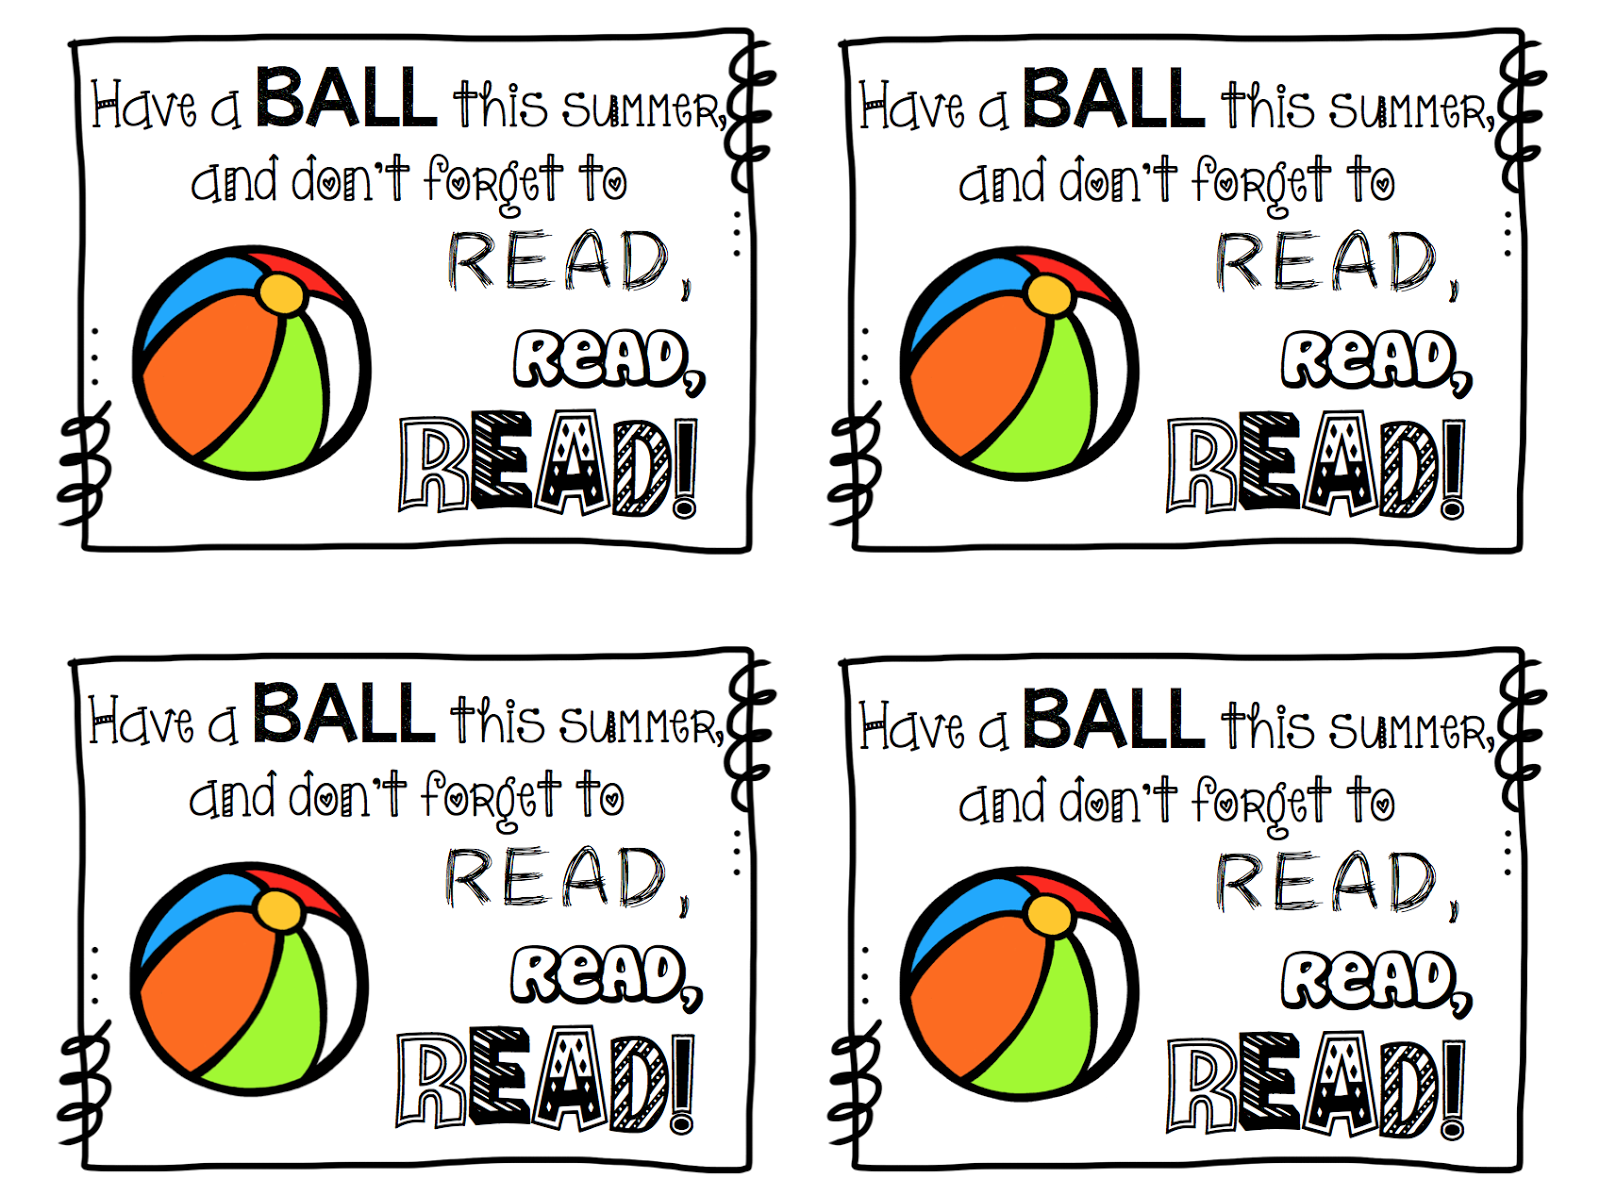 Have A BALL This Summer TheHappyTeacher